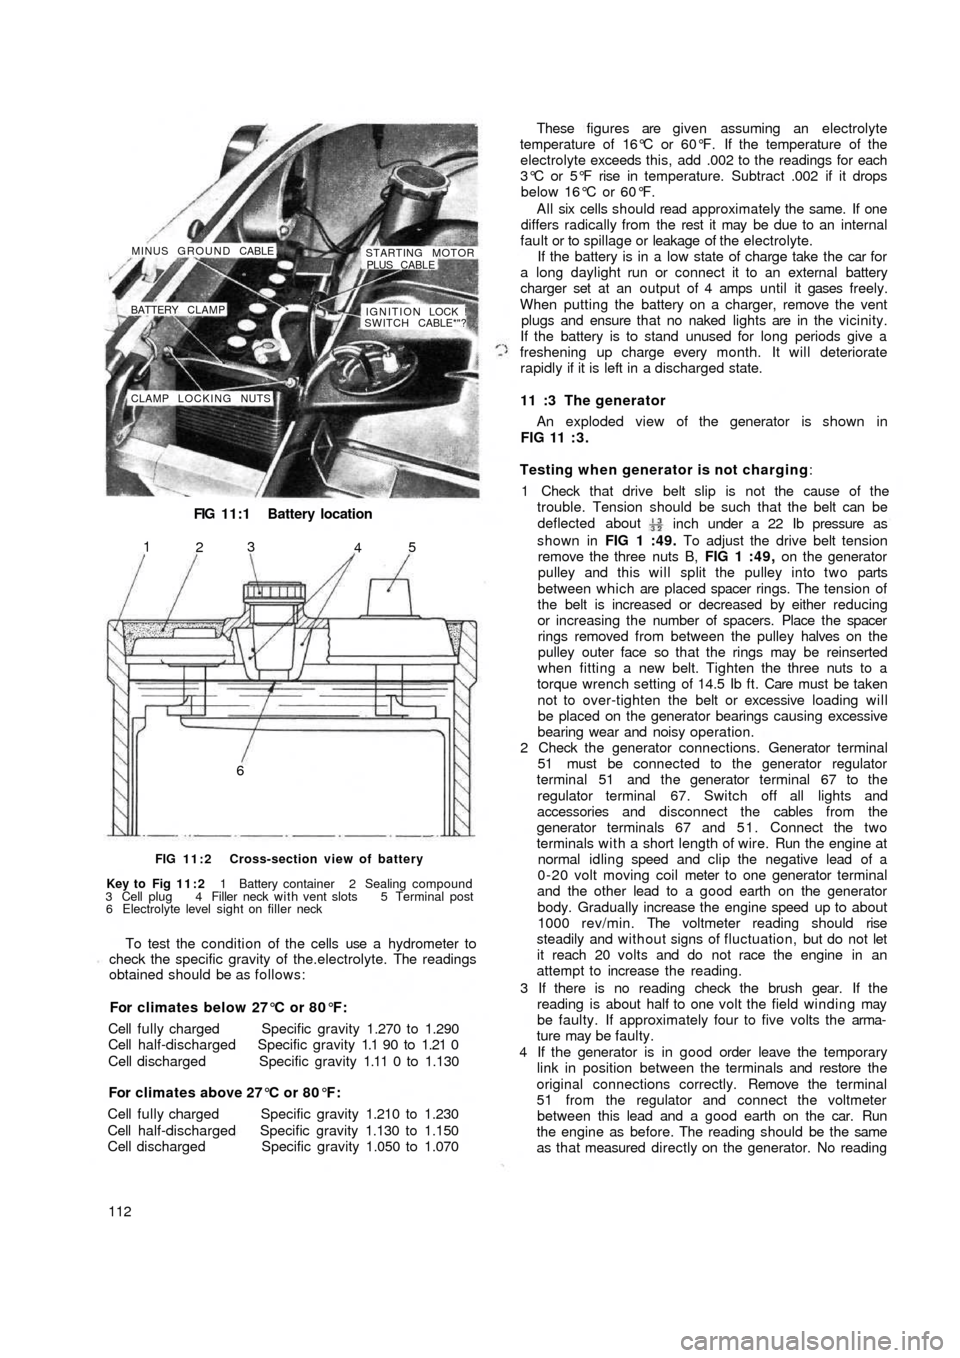 FIAT 500 1964 1.G Workshop Manual FIG 11:1 Battery location
CLAMP LOCKING NUTSIGNITION LOCK !
SWITCH CABLE*"? BATTERY CLAMP MINUS GROUND CABLE
STARTING MOTOR
PLUS CABLE
65
4 3
2 1
FIG 11:2 Cross-section view of battery
Key to  Fig  11